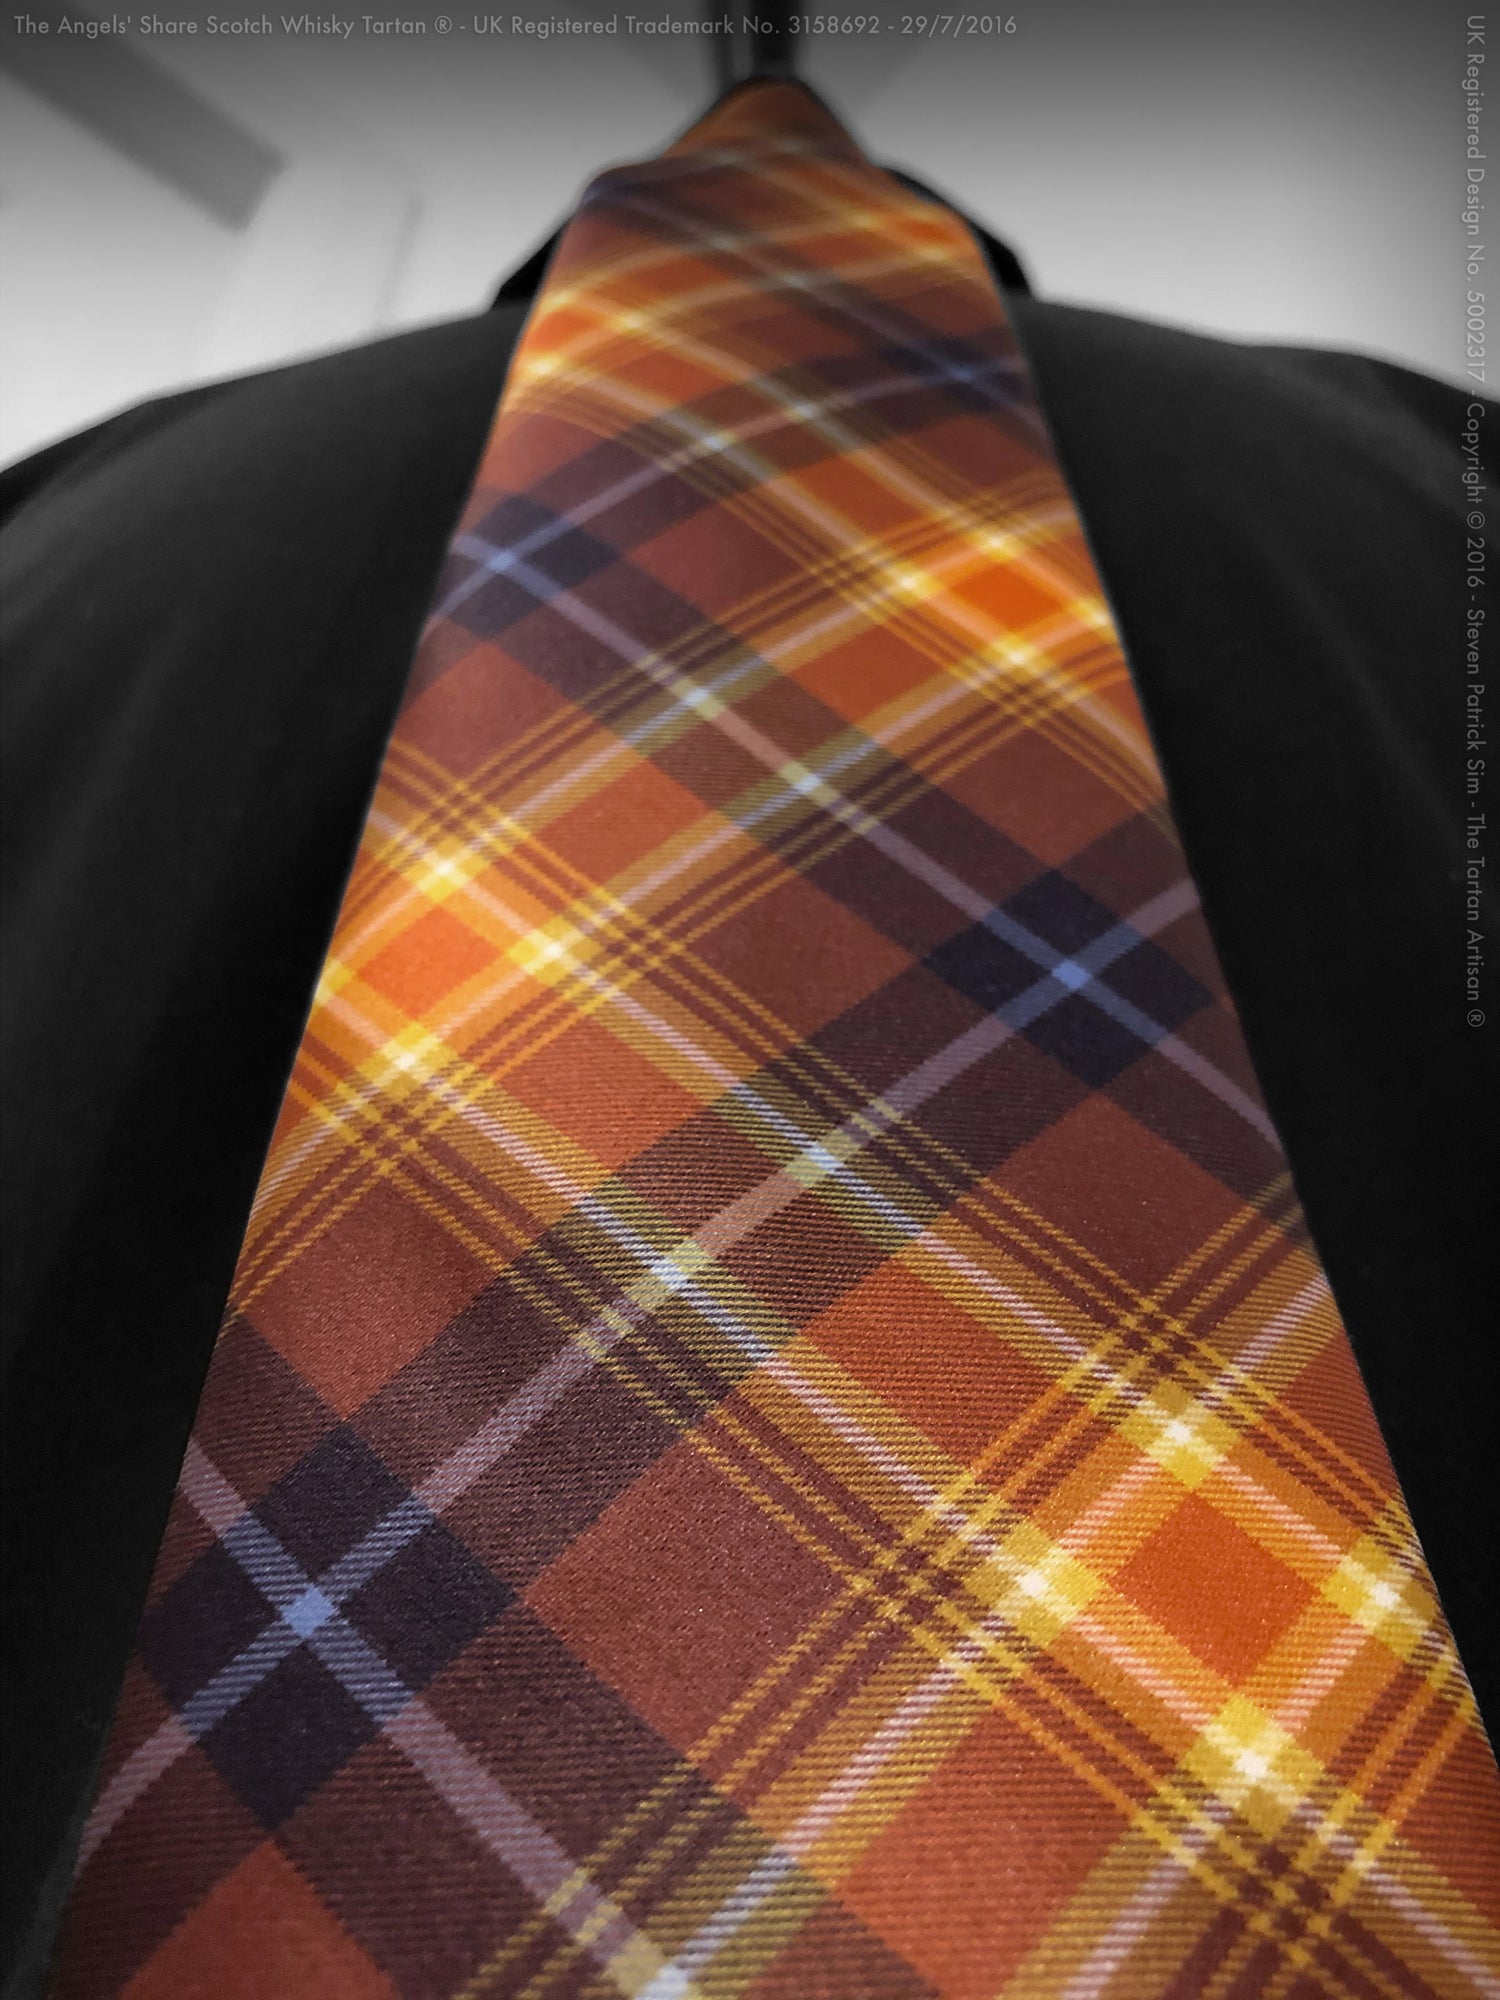 The Angels' Share Scotch Whisky Tartan Gents Neck Tie made in Scotland - exclusive to Steven Patrick Sim